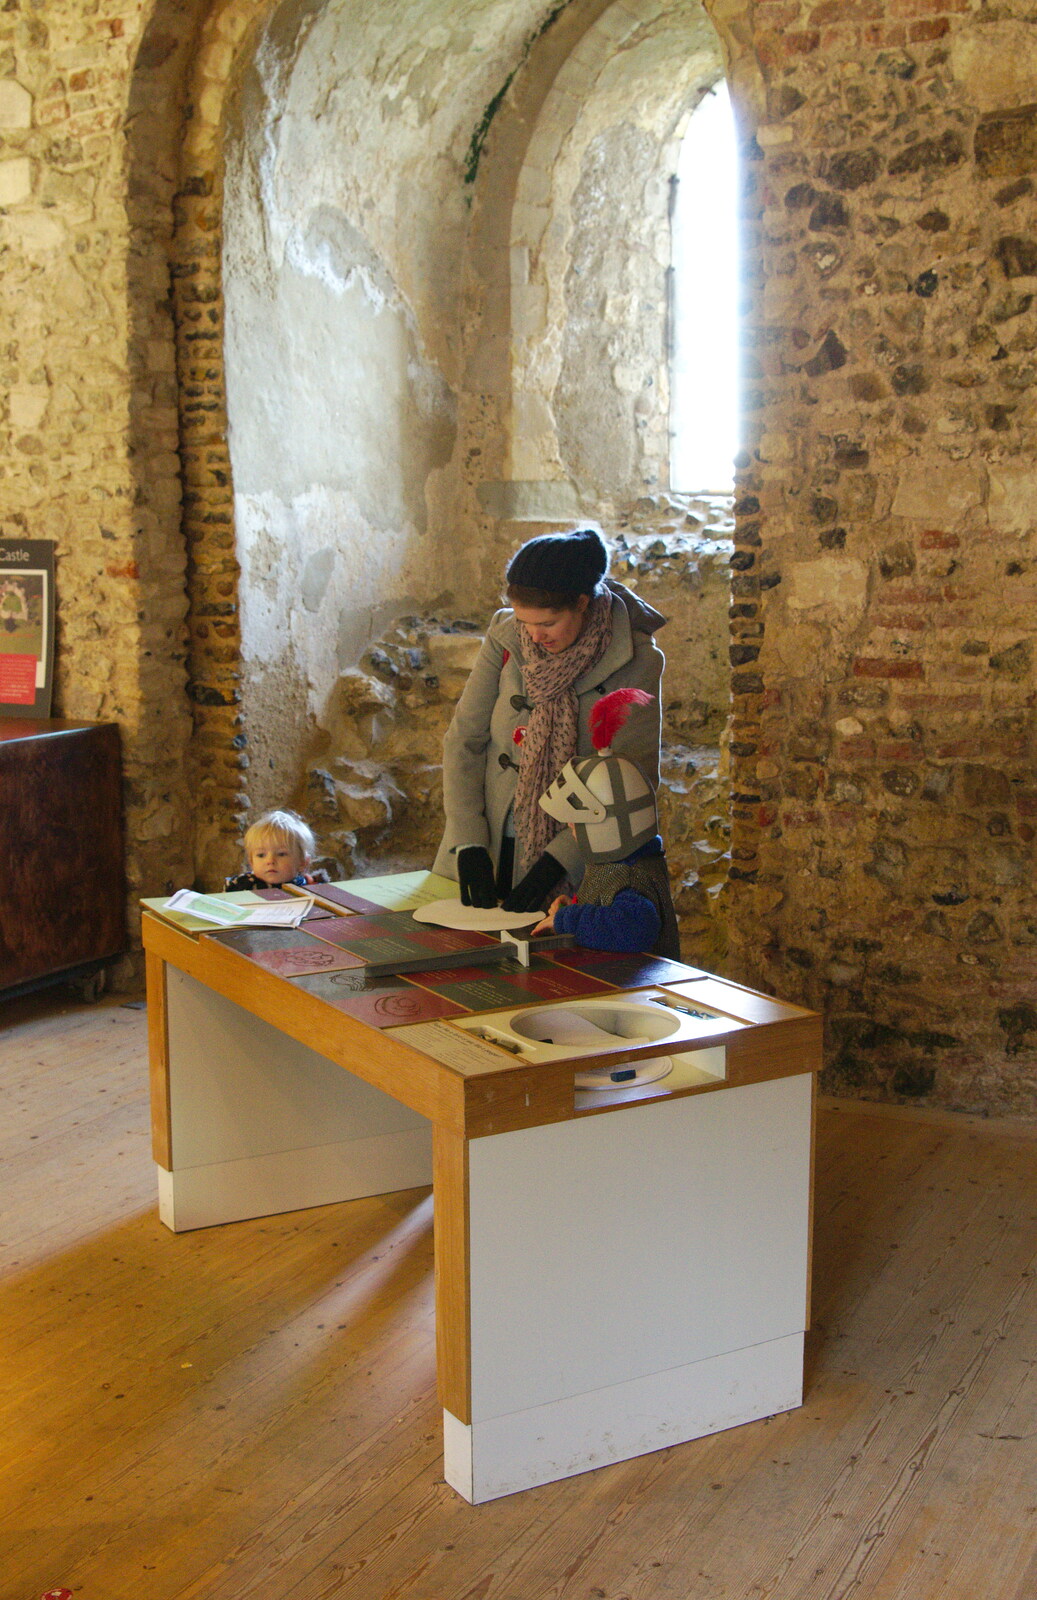 Isobel and Fred do some rubbings from A Trip to Framlingham Castle, Framlingham, Suffolk - 16th February 2014